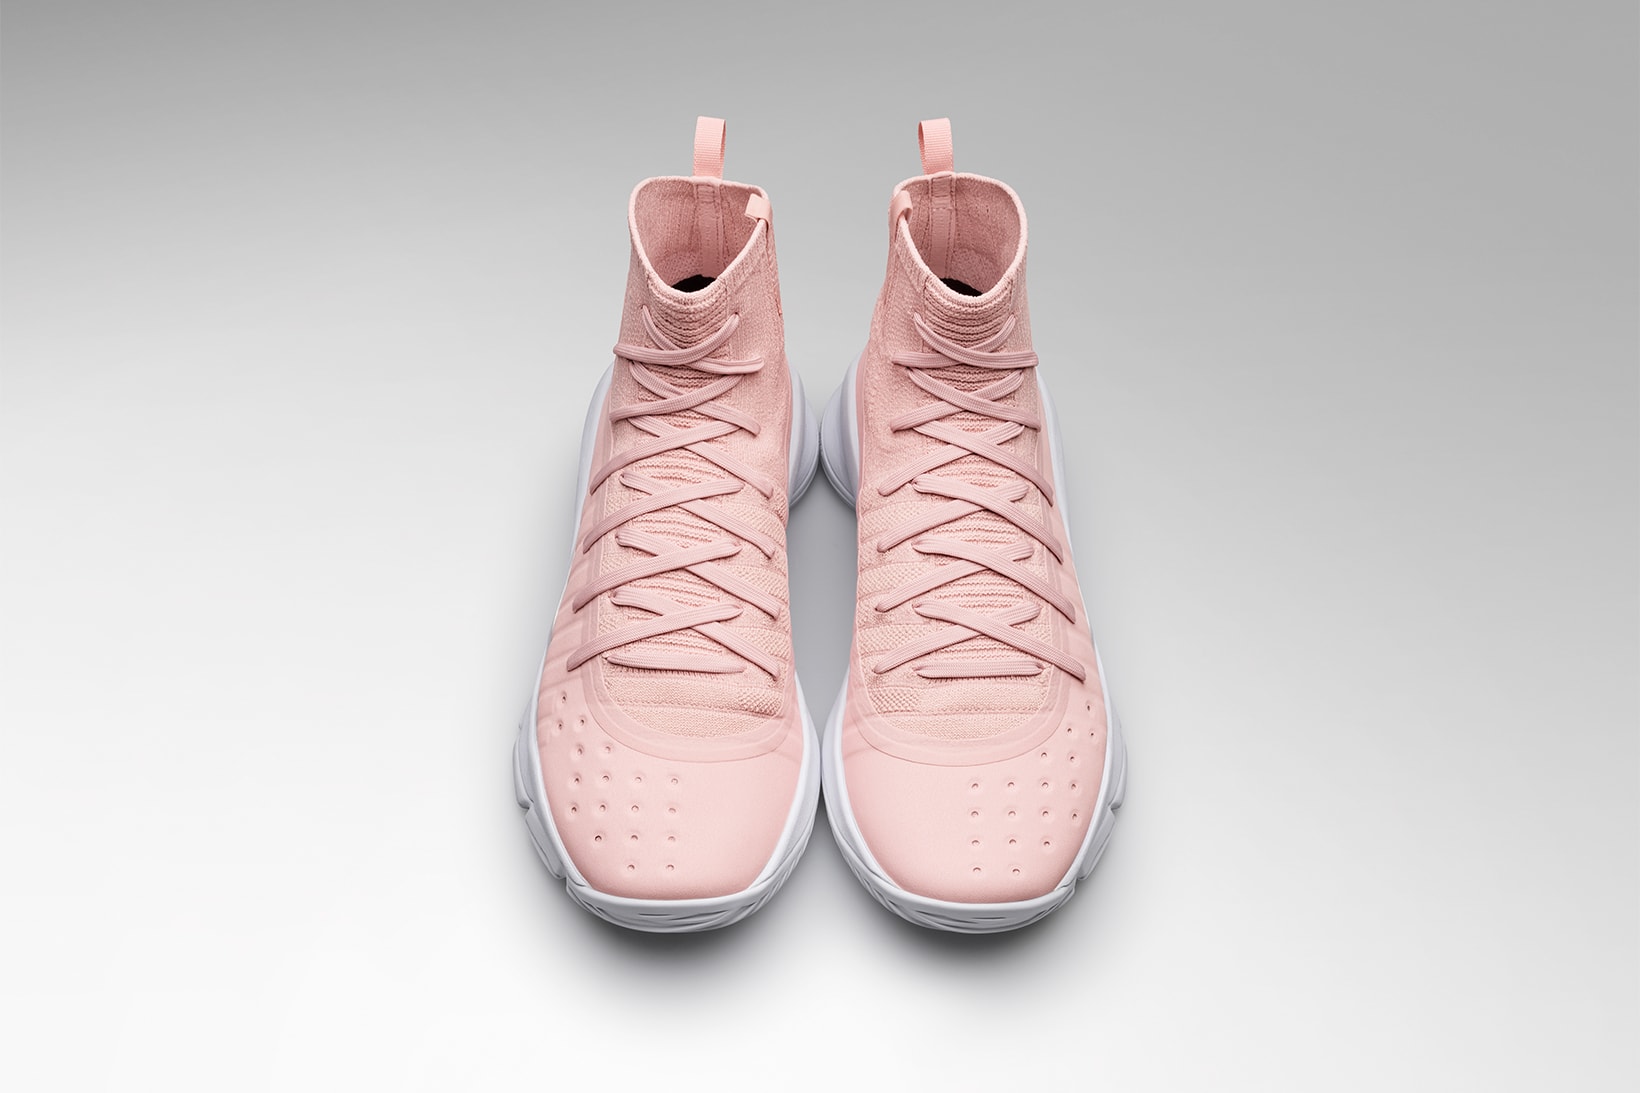 Under Armour Curry 4 Flushed Pink Stephen Curry Ayesha Curry Valentines Day February 2018 footwear